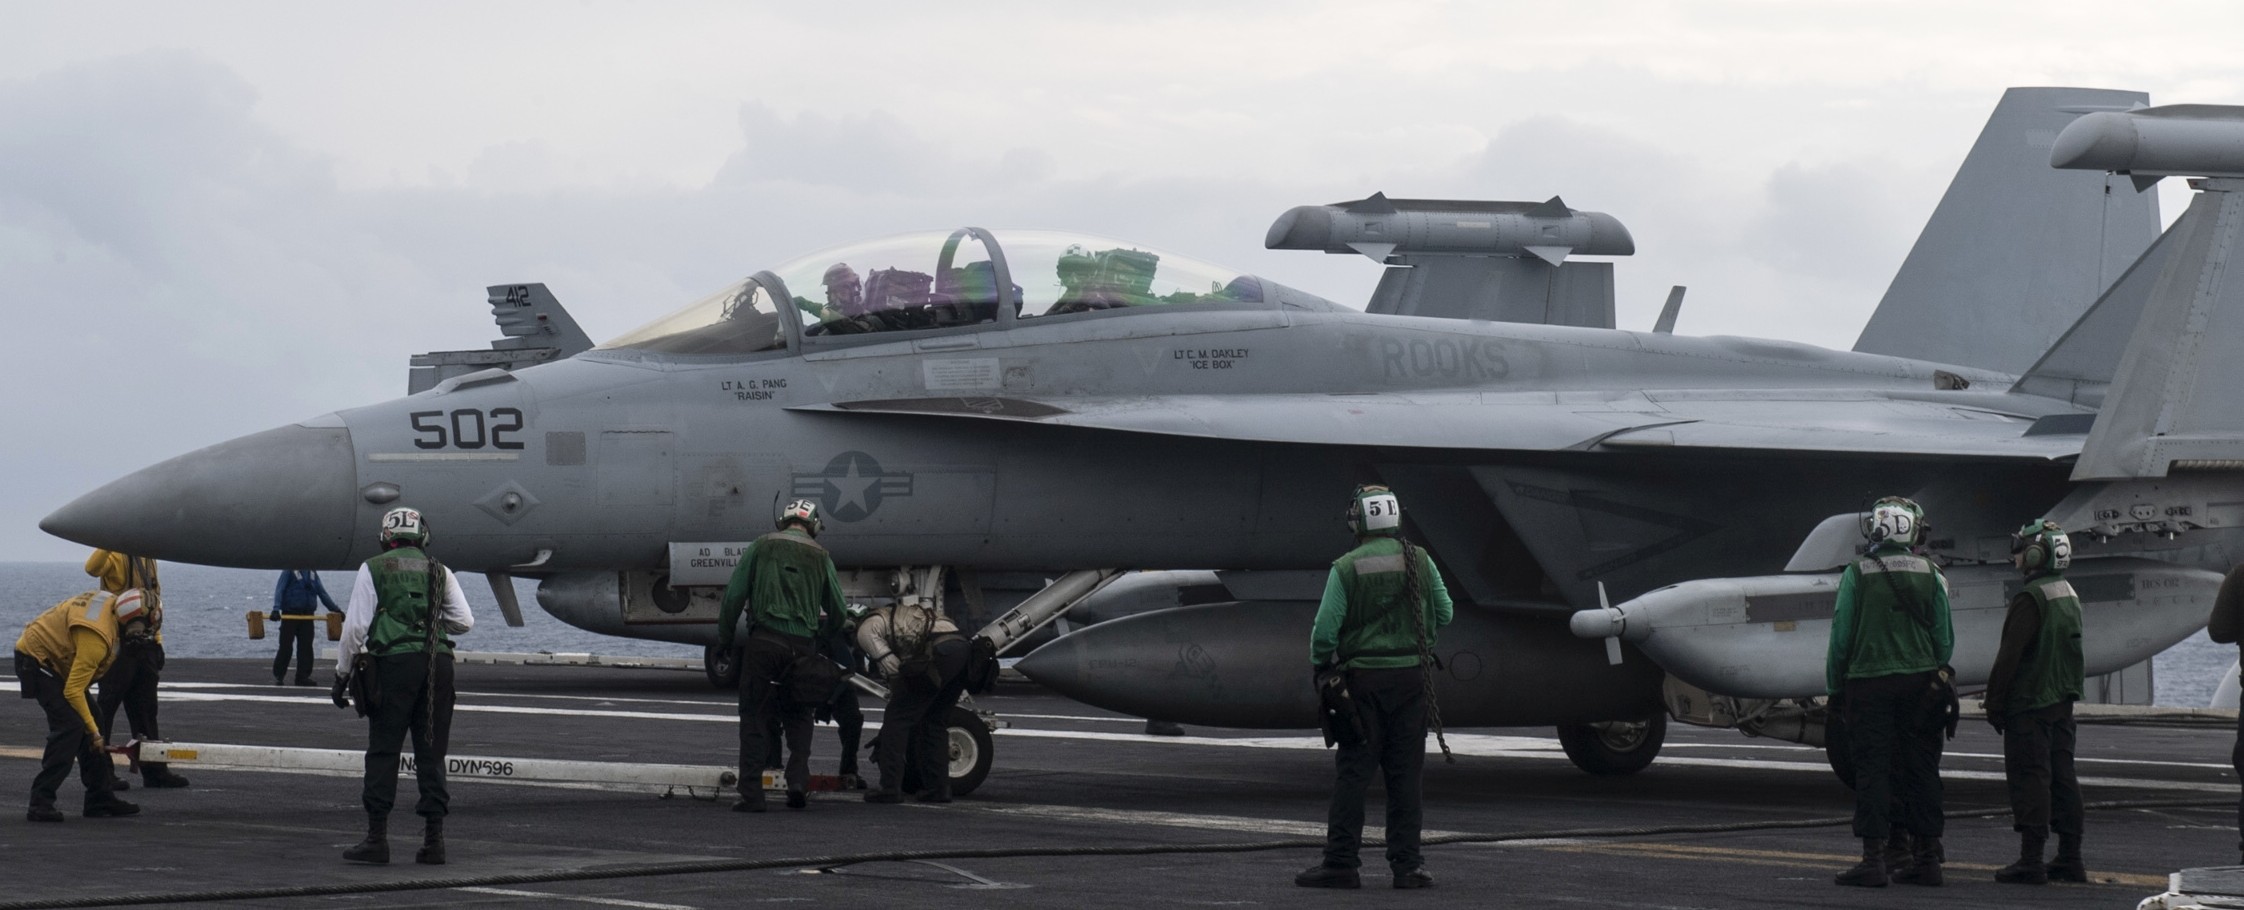 vaq-137 rooks electronic attack squadron us navy ea-18g growler carrier air wing cvw-1 uss harry s. truman cvn-75 79